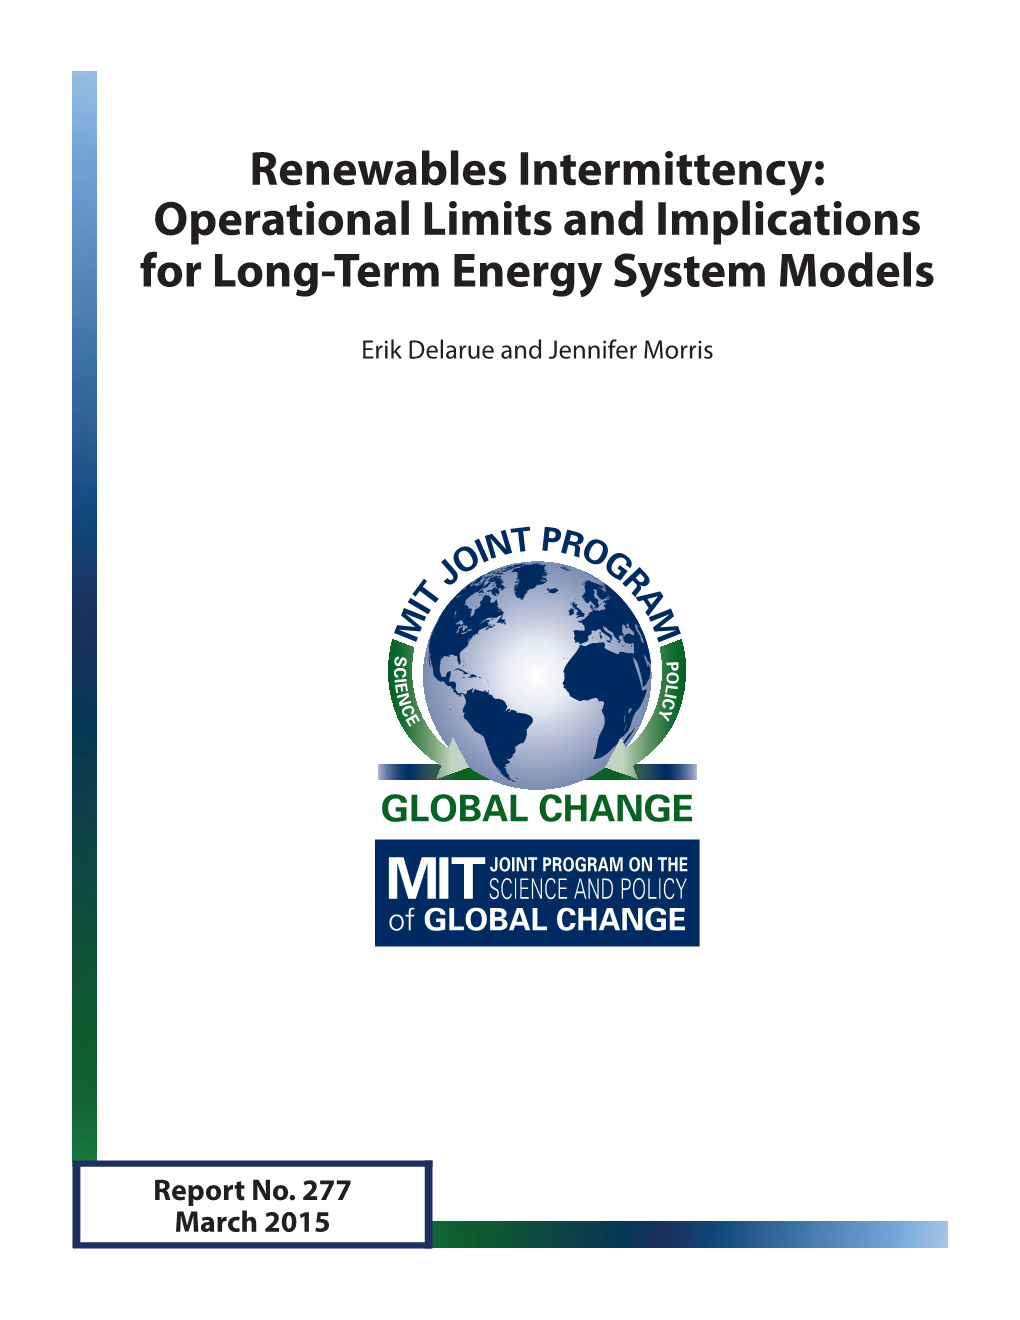 Operational Limits and Implications for Long-Term Energy System Models